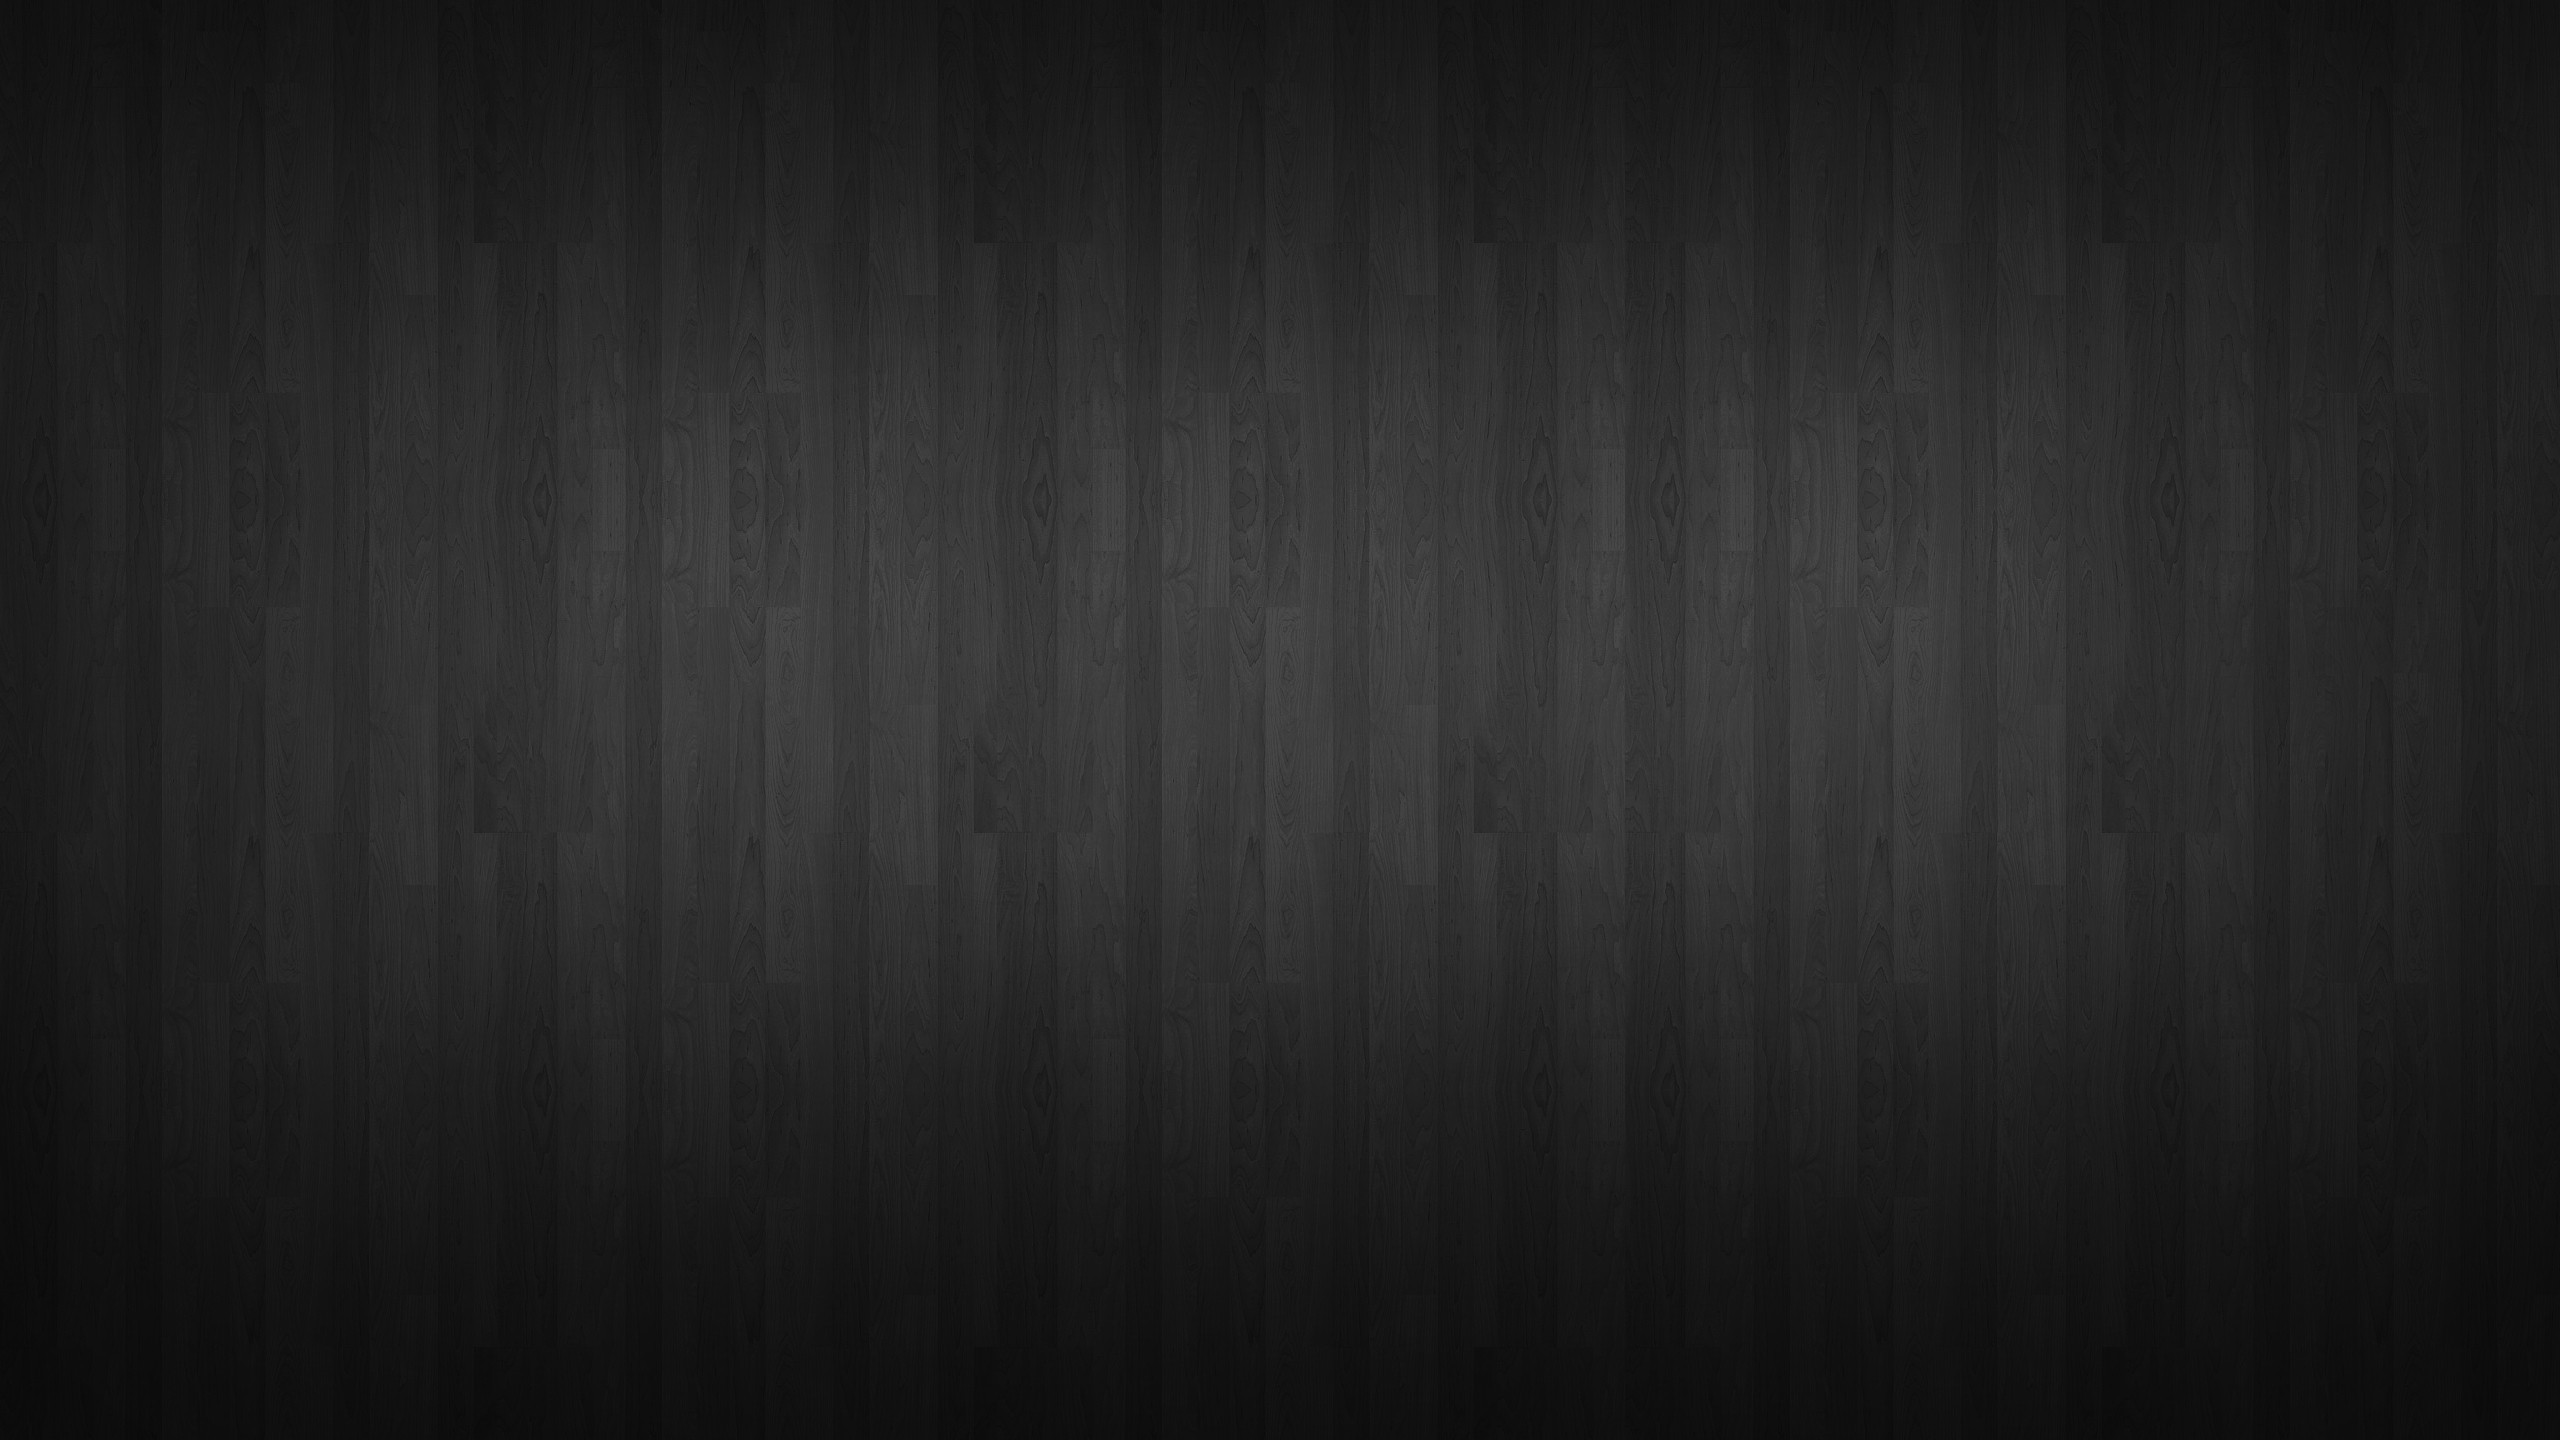 General 2560x1440 wood texture monochrome wooden surface